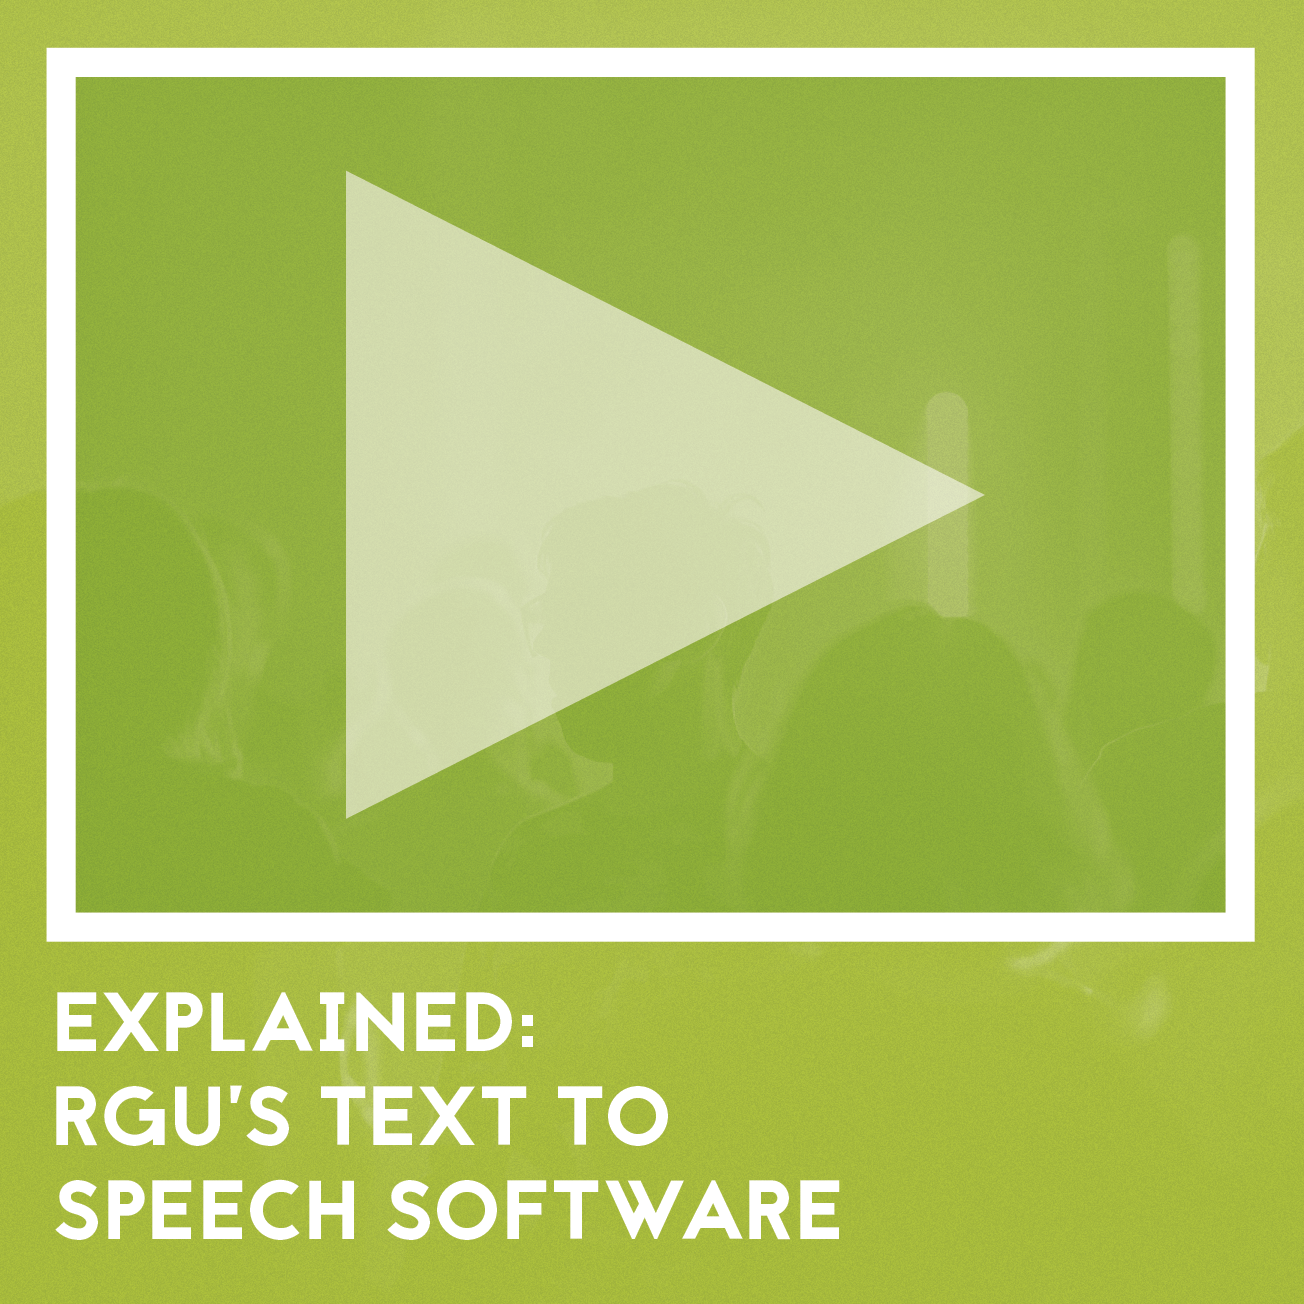 Video Available Soon: Explained RGU's Text to Speech Software